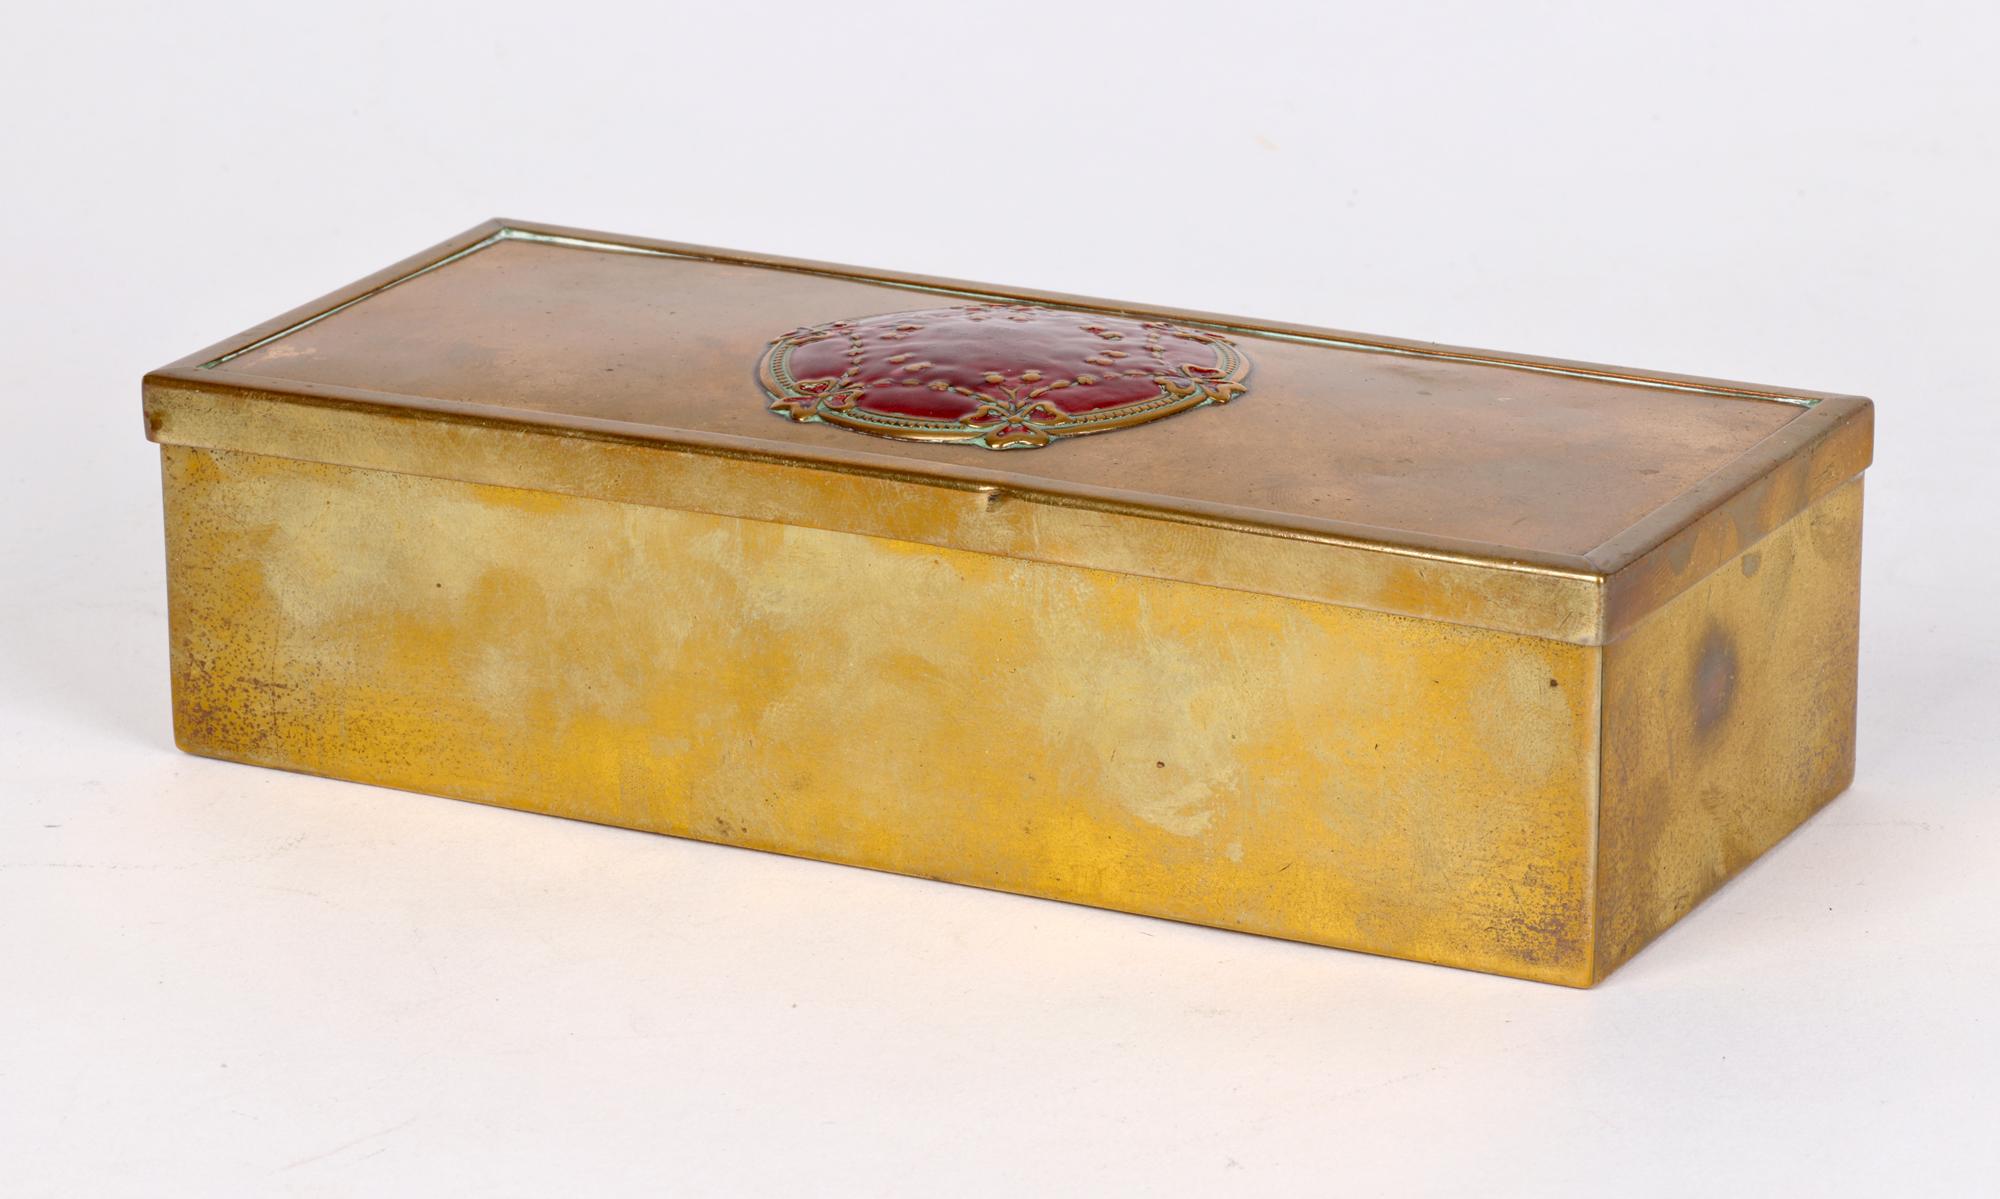 Early 20th Century Art Nouveau Good Quality Enamel Decorated Brass Box For Sale